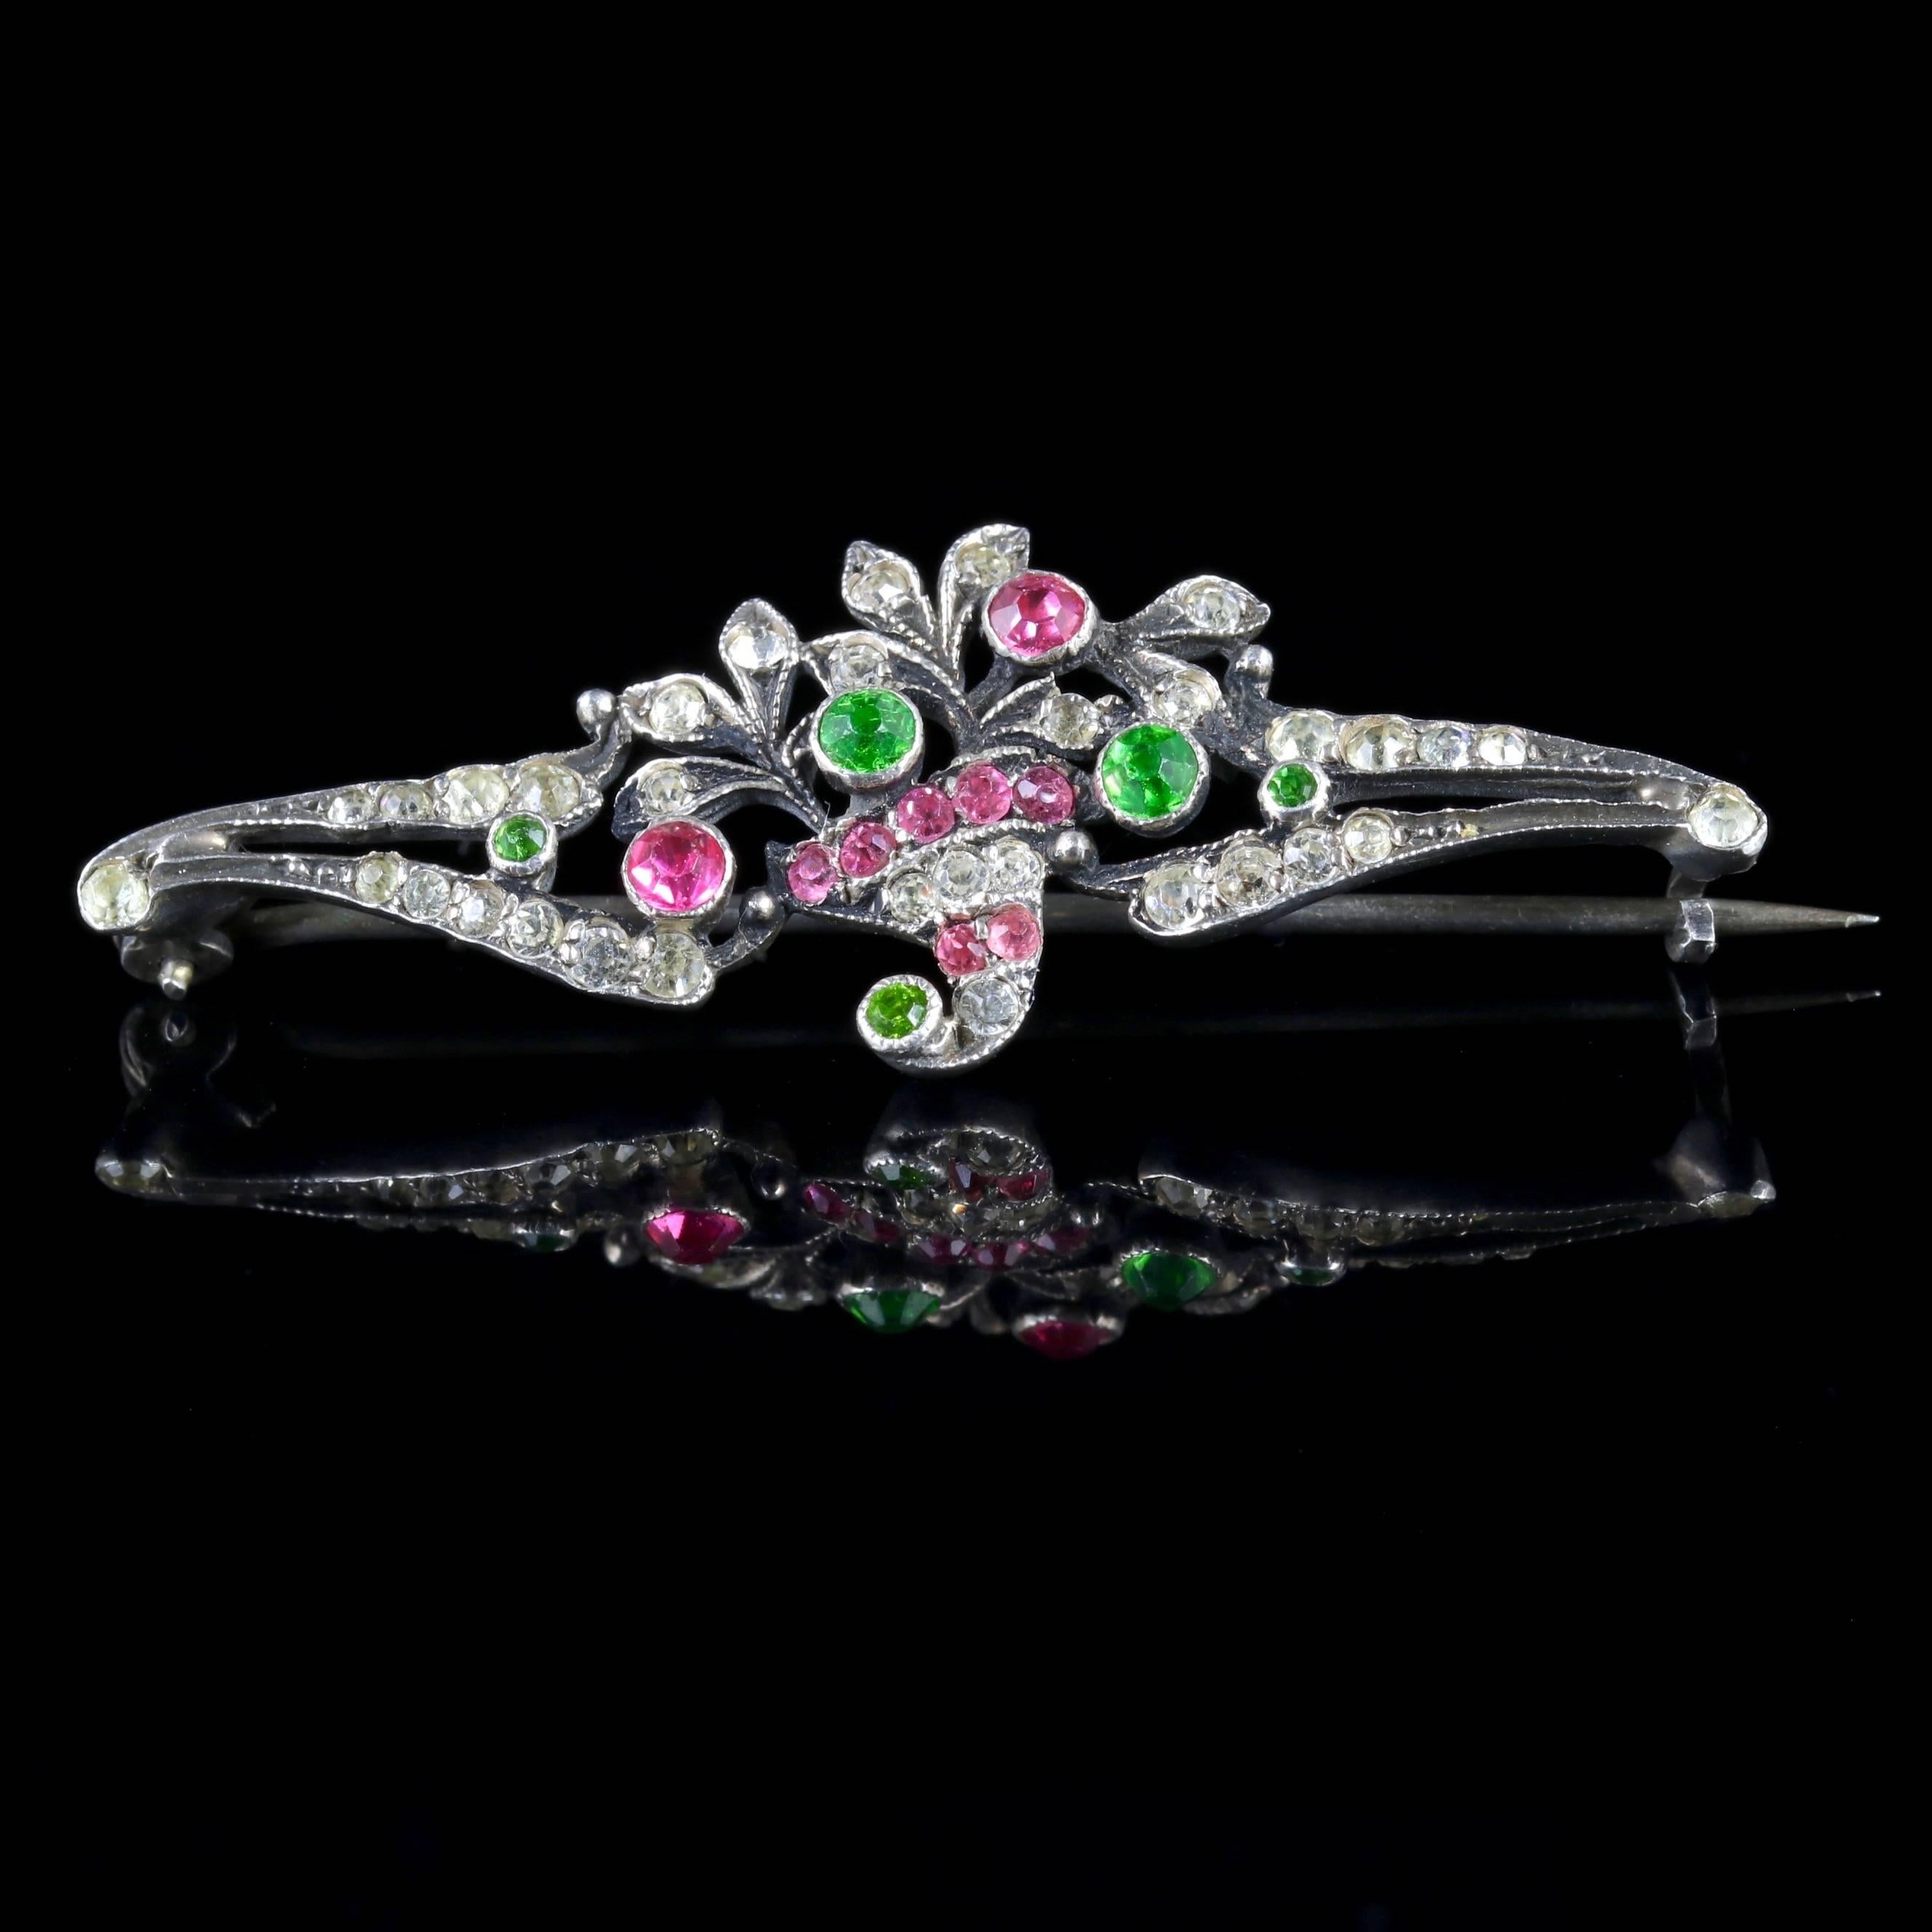 This fabulous Victorian Suffragette brooch is Circa 1900.

The brooch displays a beautiful basket of flowers which is adorned in pretty pink, green and white sparkling Paste Stones, that represent the Suffragette movement.

Emmeline Pankhurst was